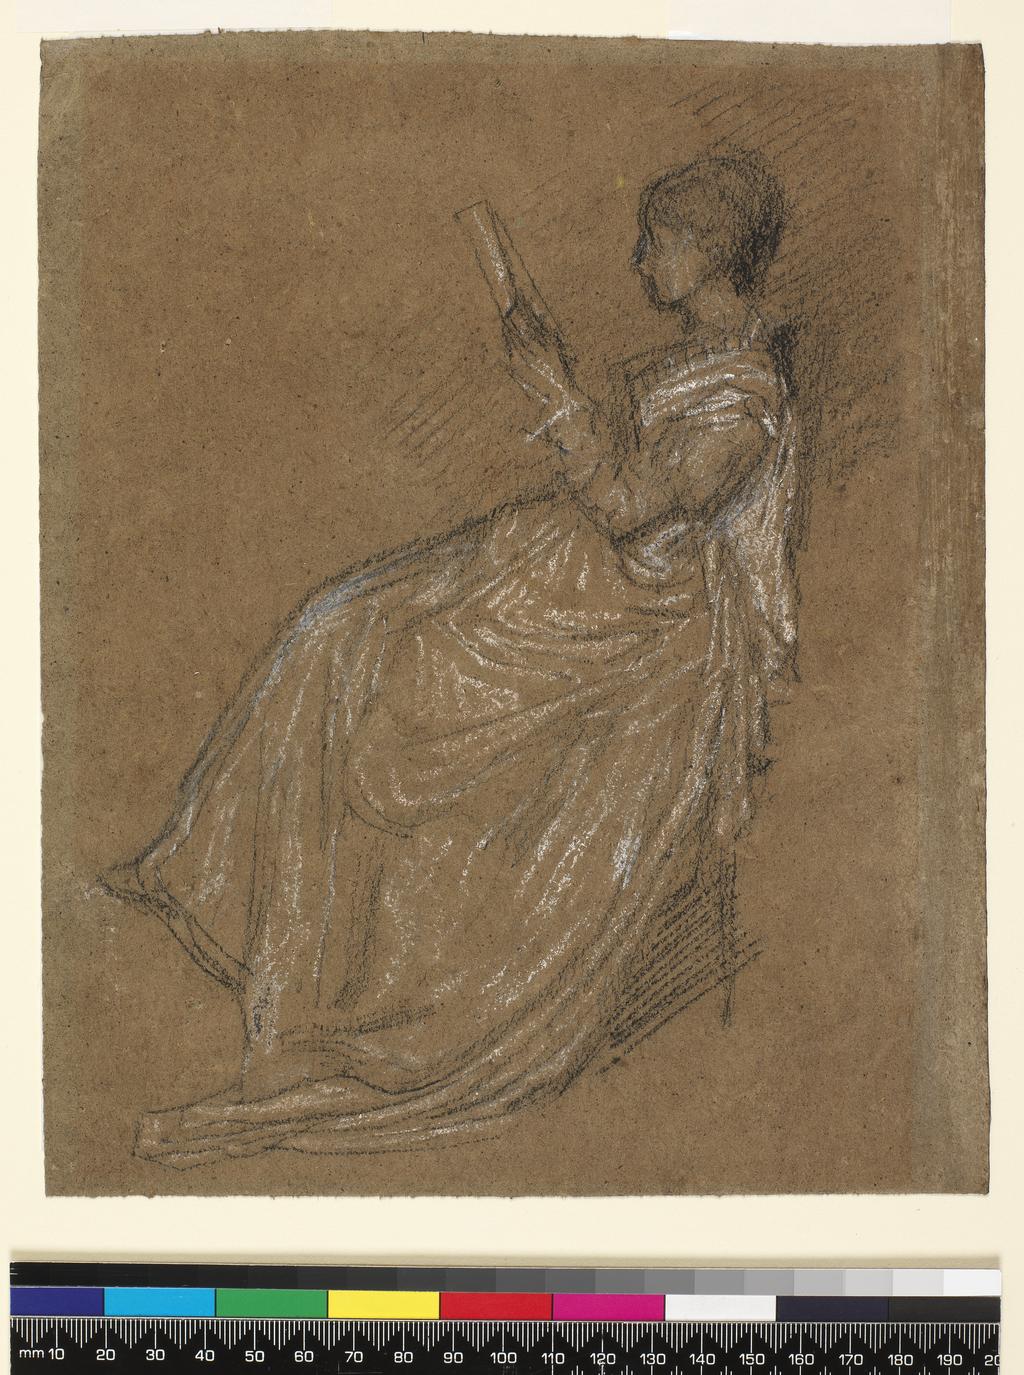 An image of Seated Lady, reading; facing left Figure Reading. Whistler, James McNeill (American, 1834-1903). Charcoal and black chalk on brown paper, height 235 mm, width 191 mm, 1871-1873.